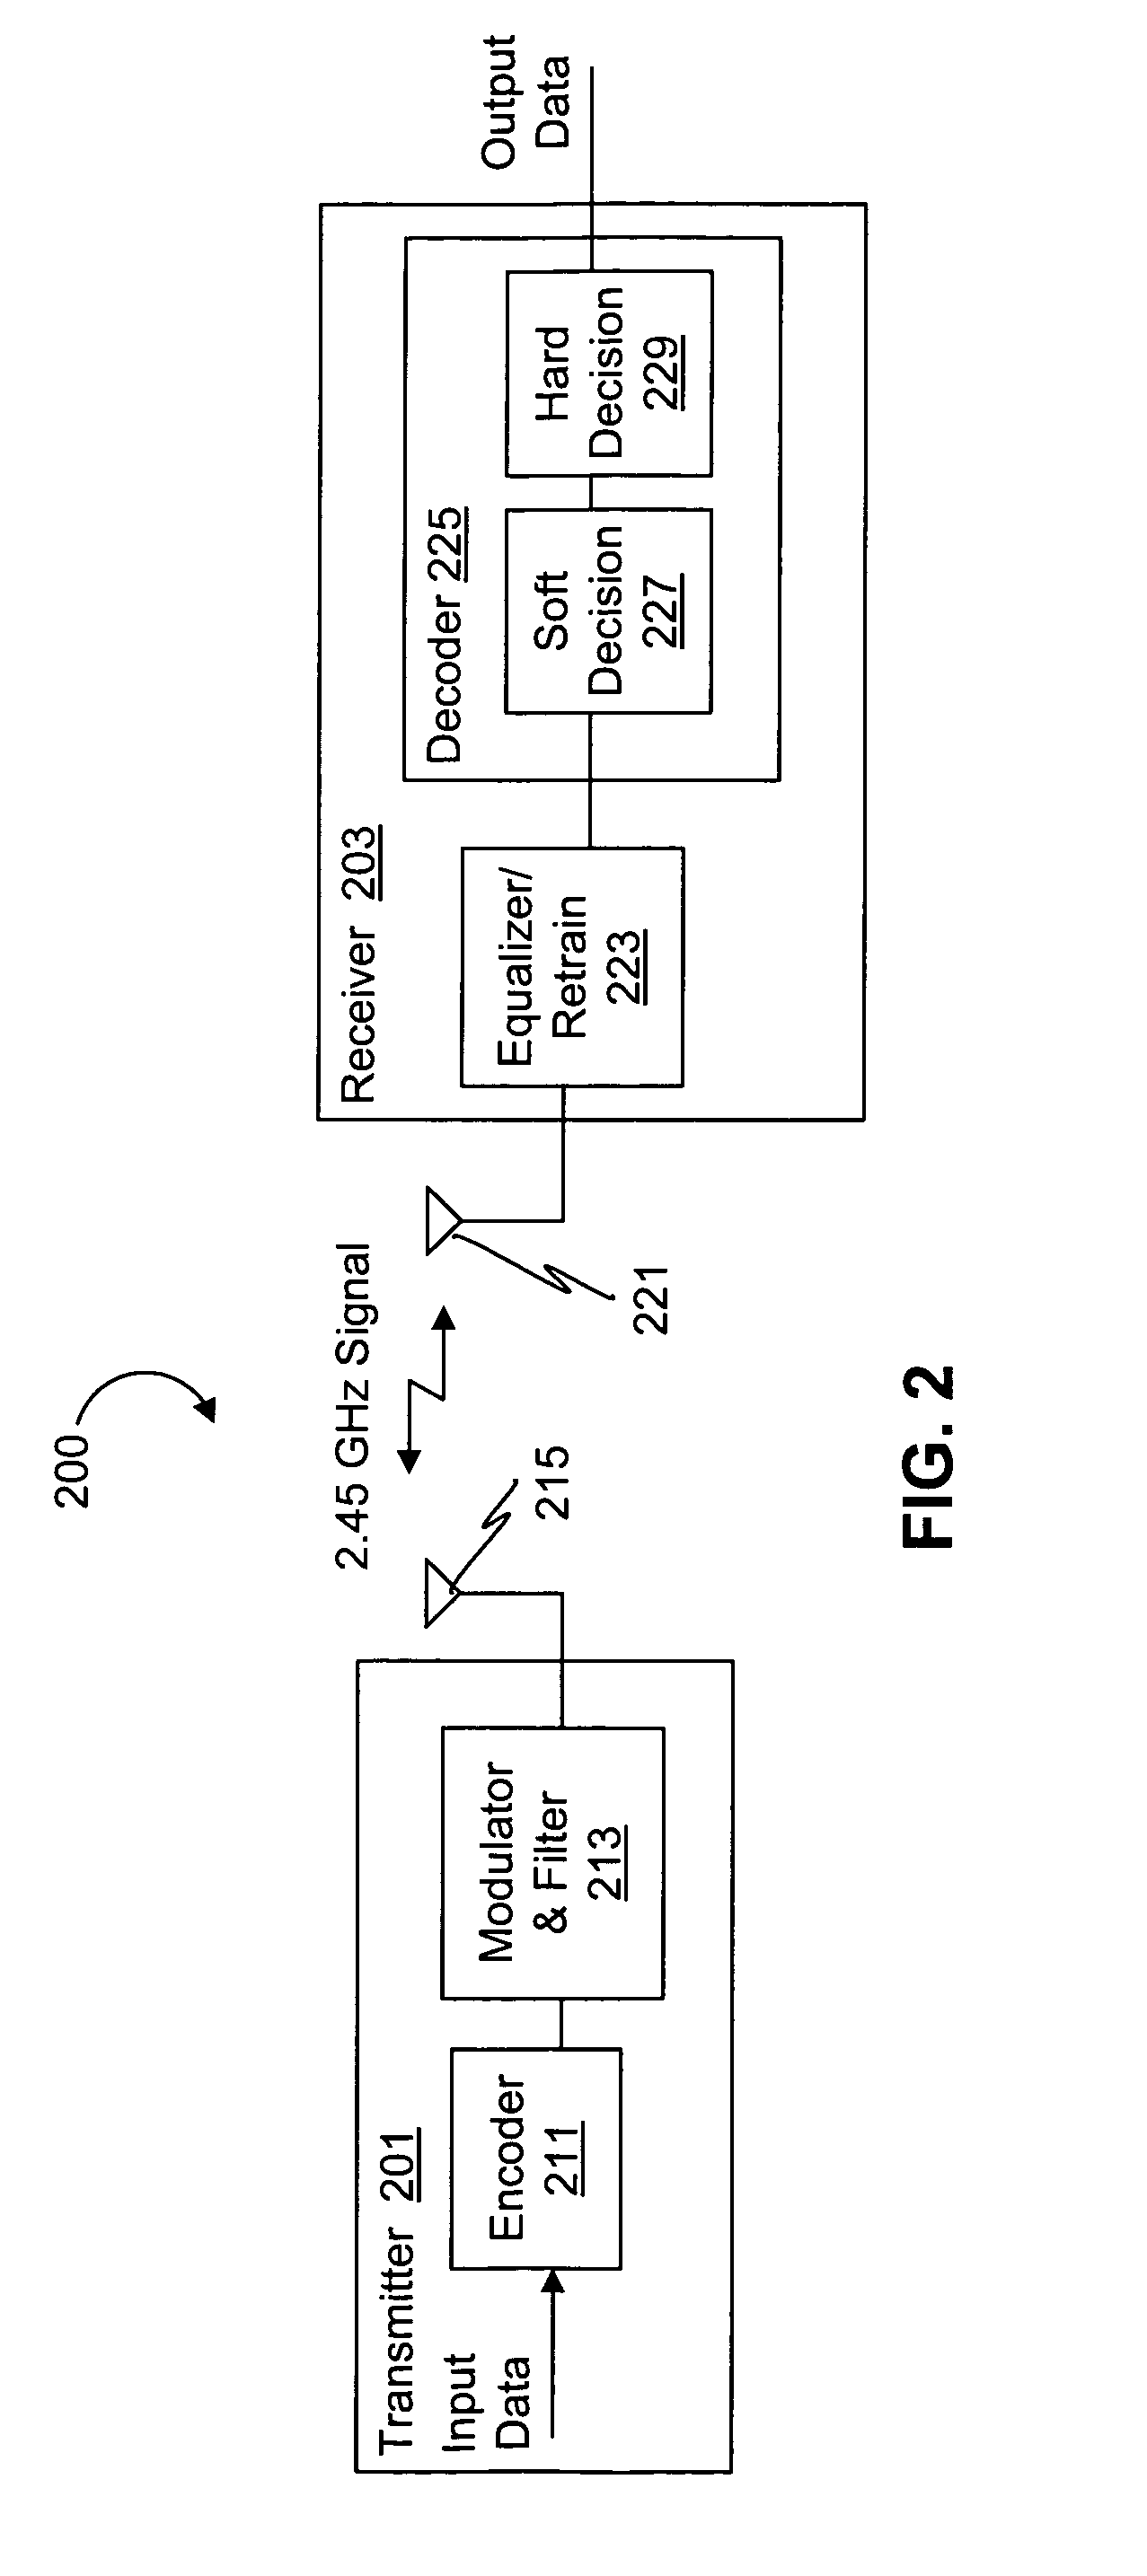 Dual packet configuration for wireless communications